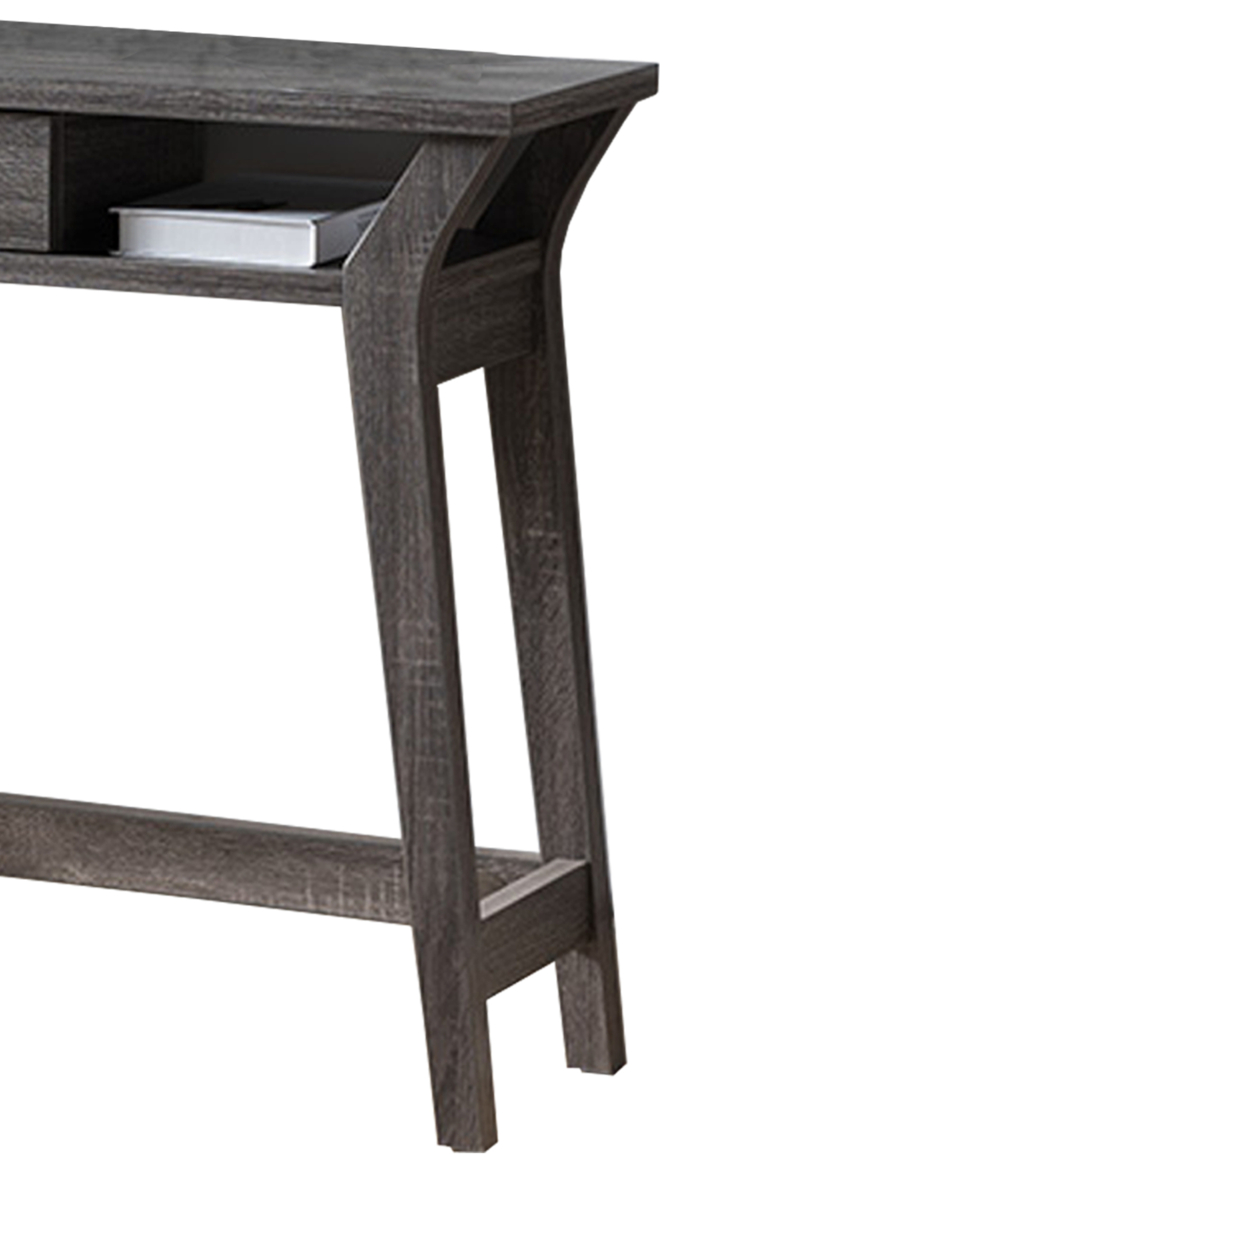 Wooden Desk With Drawer And Shelves, Distressed Gray- Saltoro Sherpi